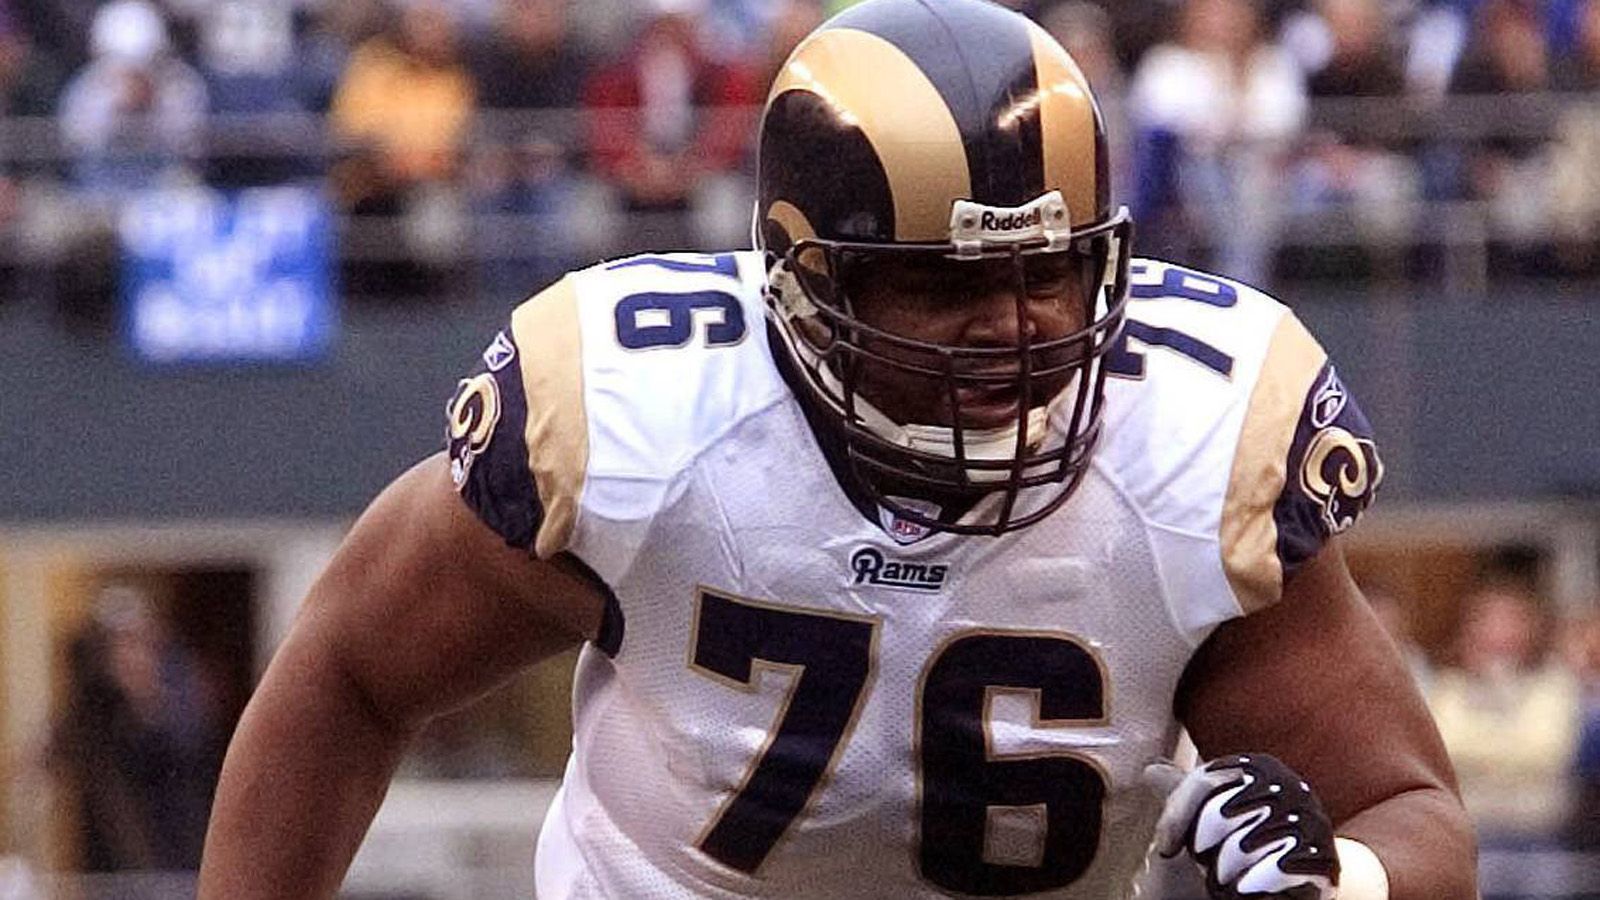 <strong>76: Orlando Pace</strong><br>Team: St. Louis Rams, Chicago Bears<br>Position: Offensive Tackle<br>Erfolge: Pro Football Hall of Famer, Super-Bowl-Champion 1999, dreimaliger First Team All-Pro, siebenmaliger Pro Bowler